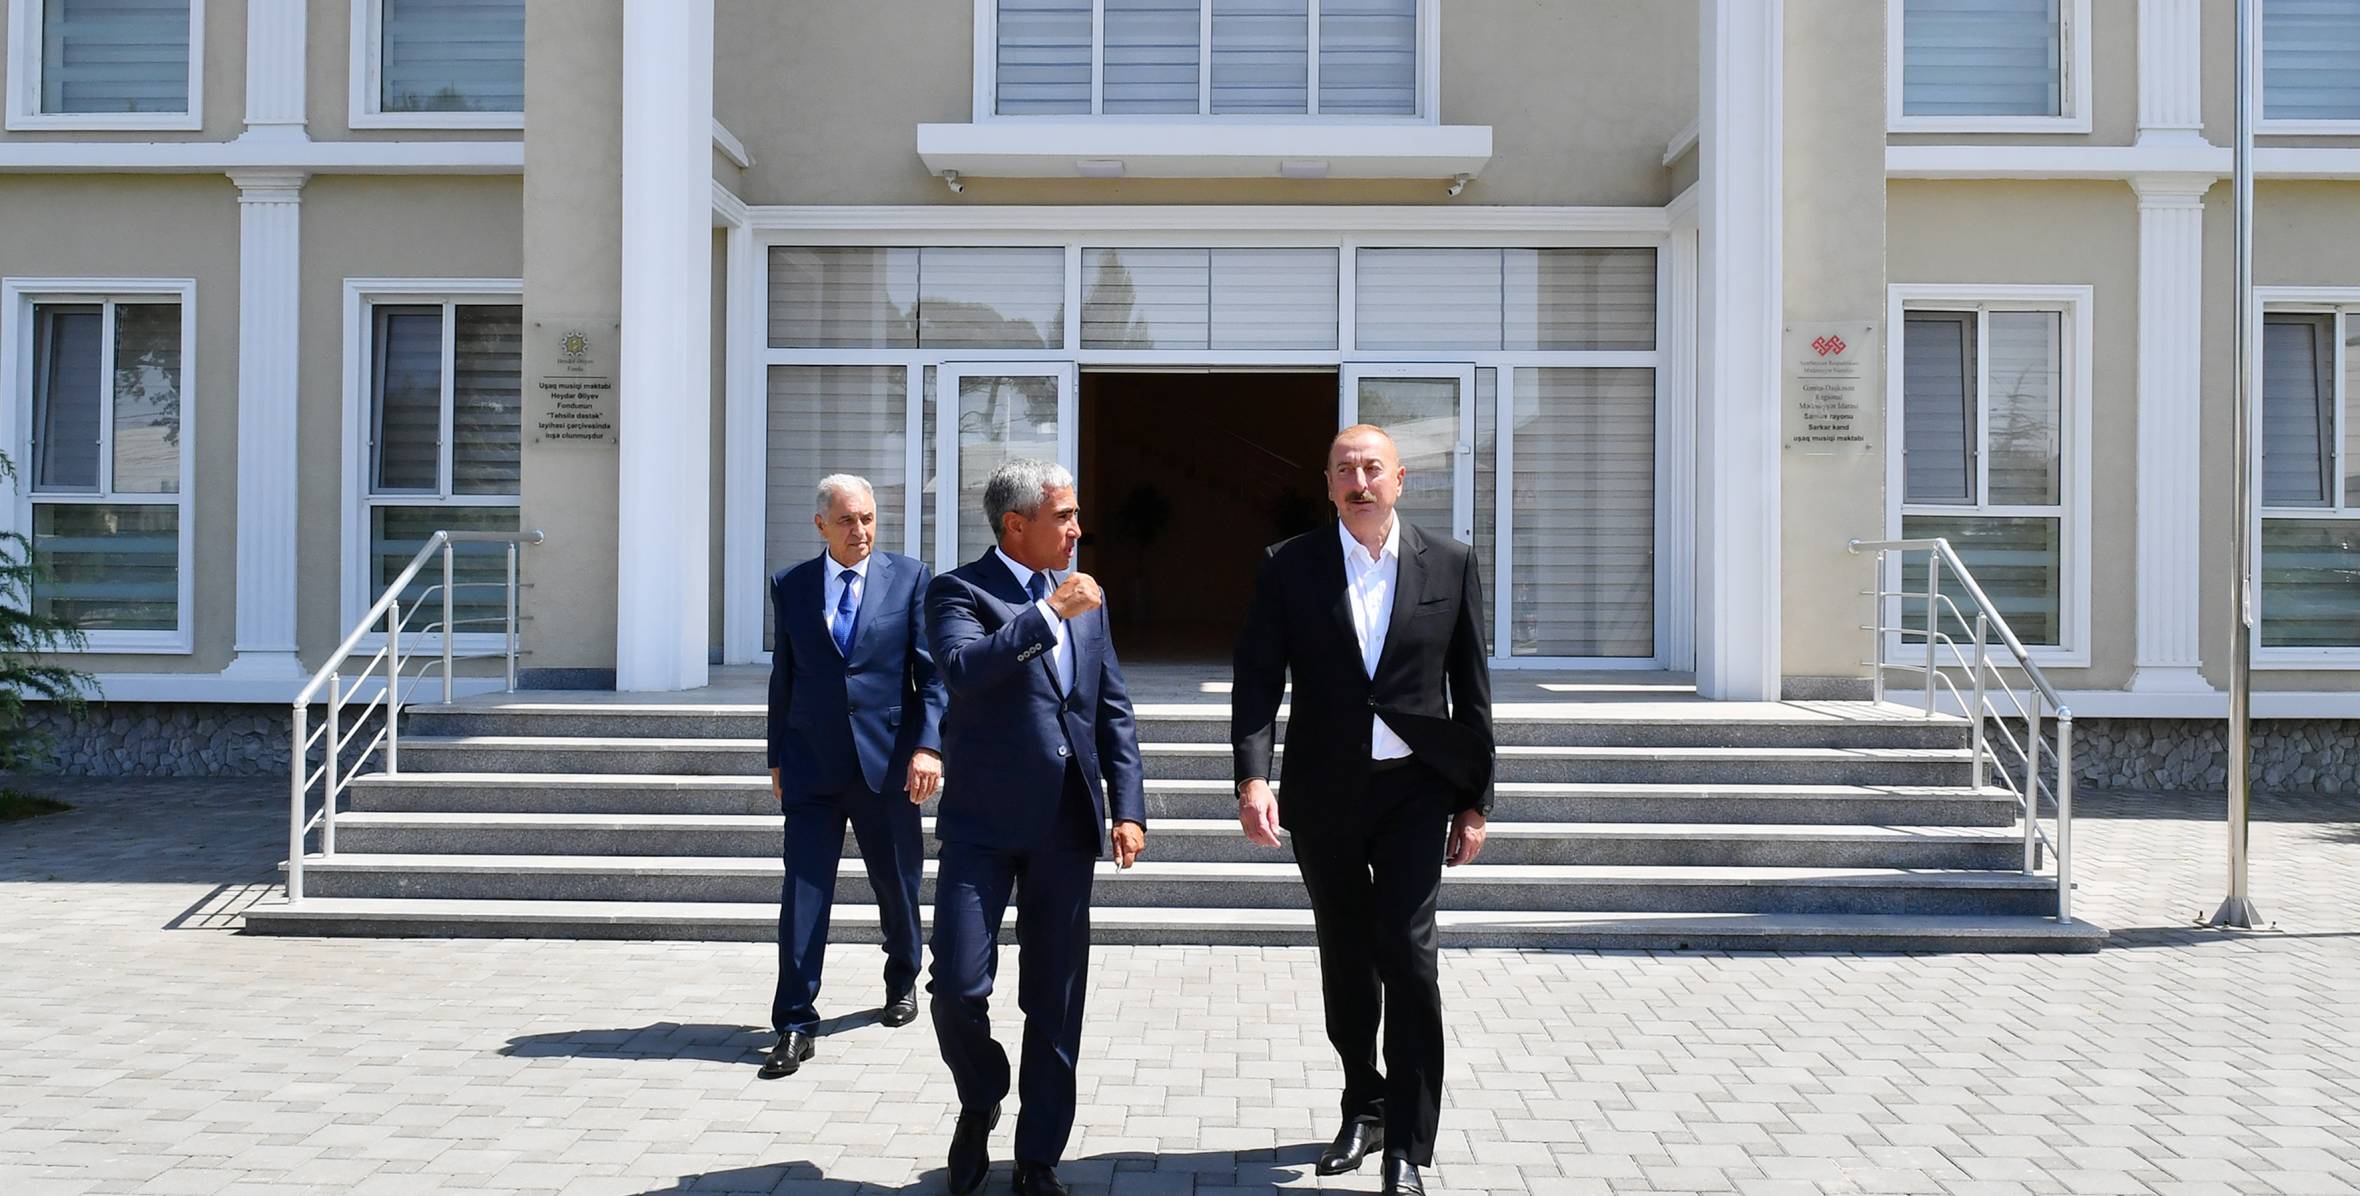 Ilham Aliyev attended the inauguration of a new building of the Serkar village children's music school constructed in Samukh as part of the Heydar Aliyev Foundation`s “Support for Education” project